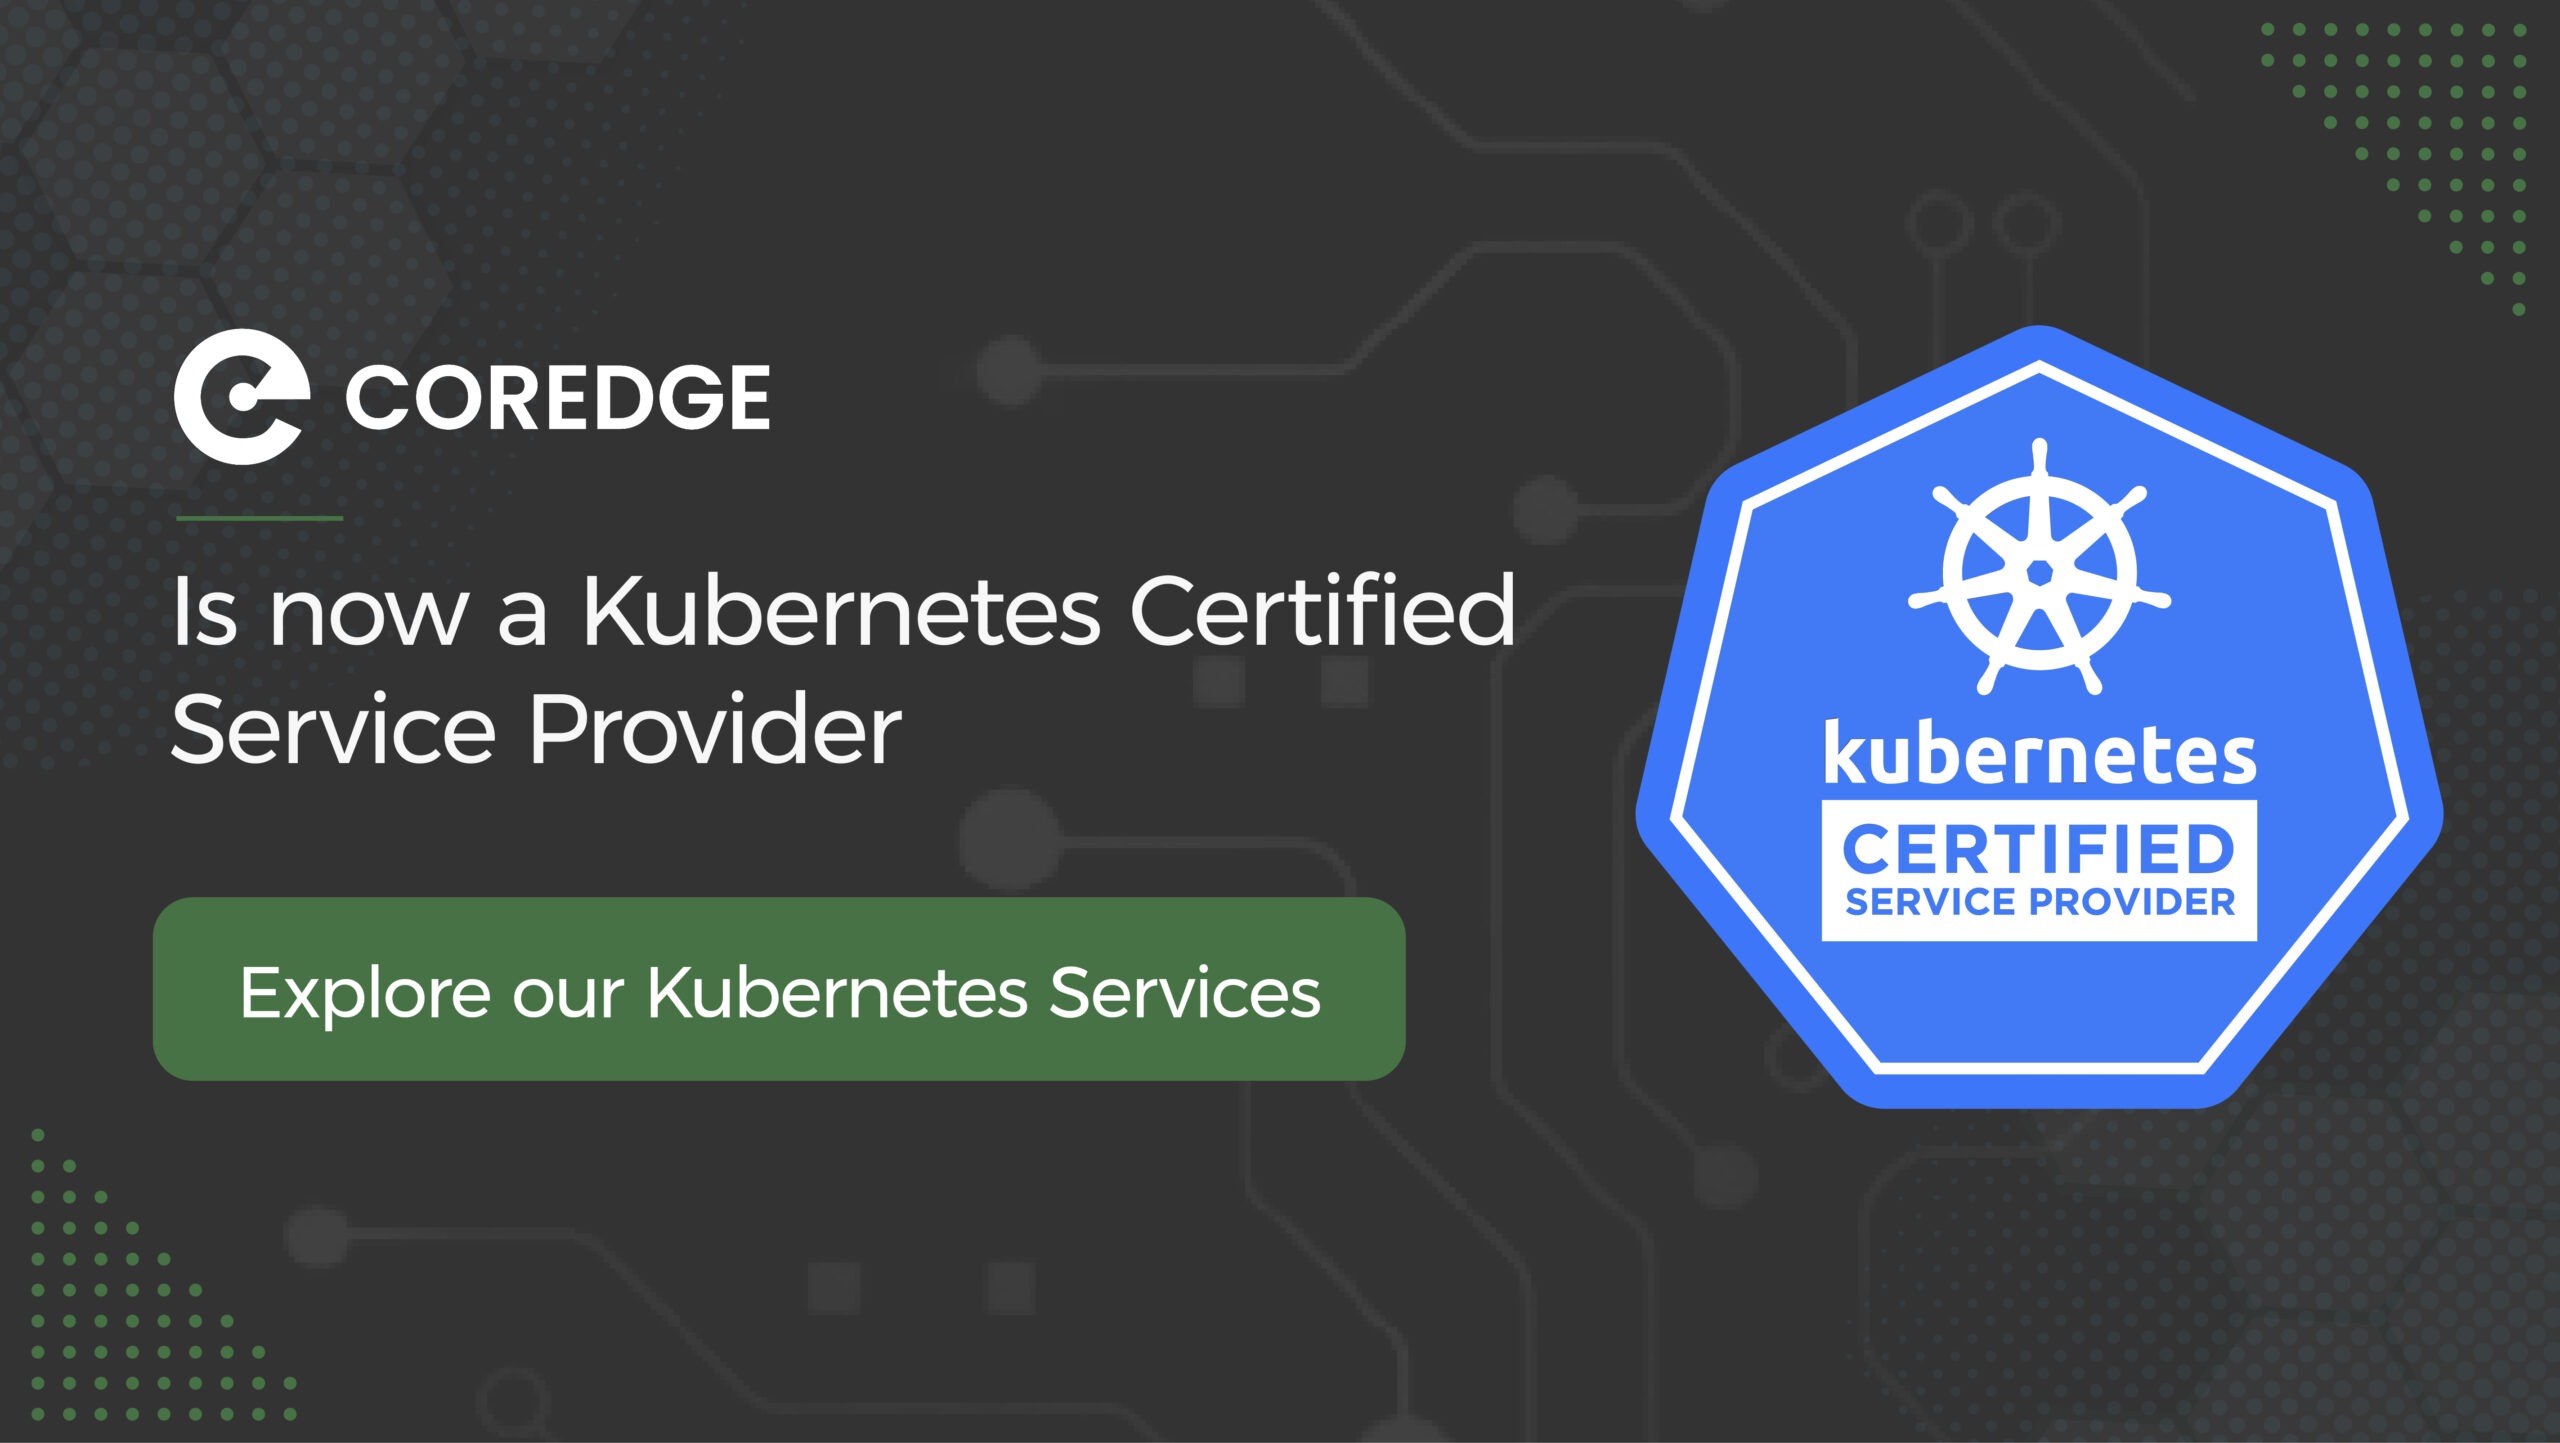 Coredge is Now Kubernetes Certified Service Provider